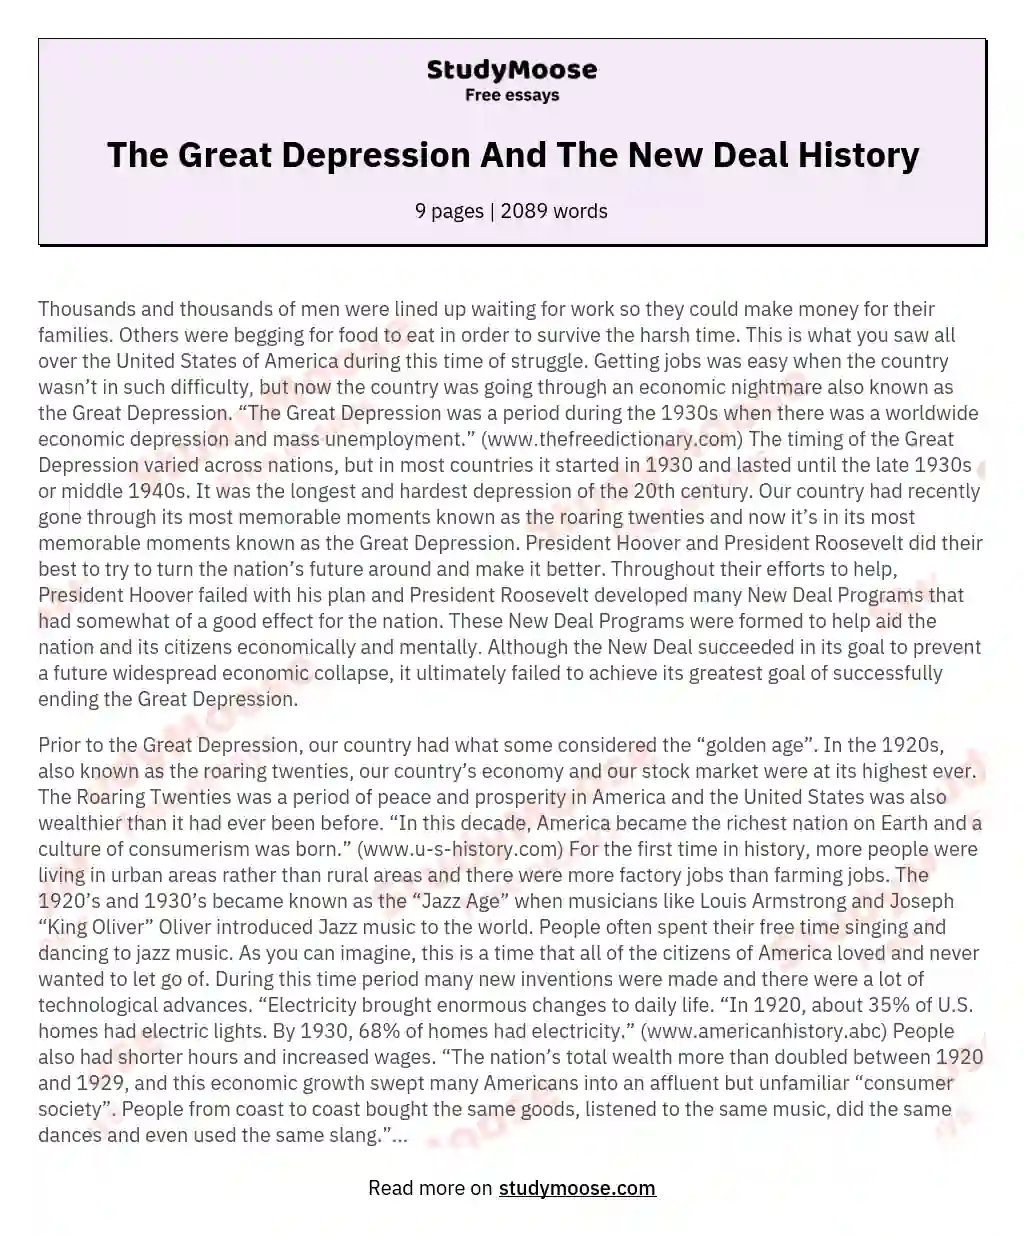 The Great Depression And The New Deal History essay